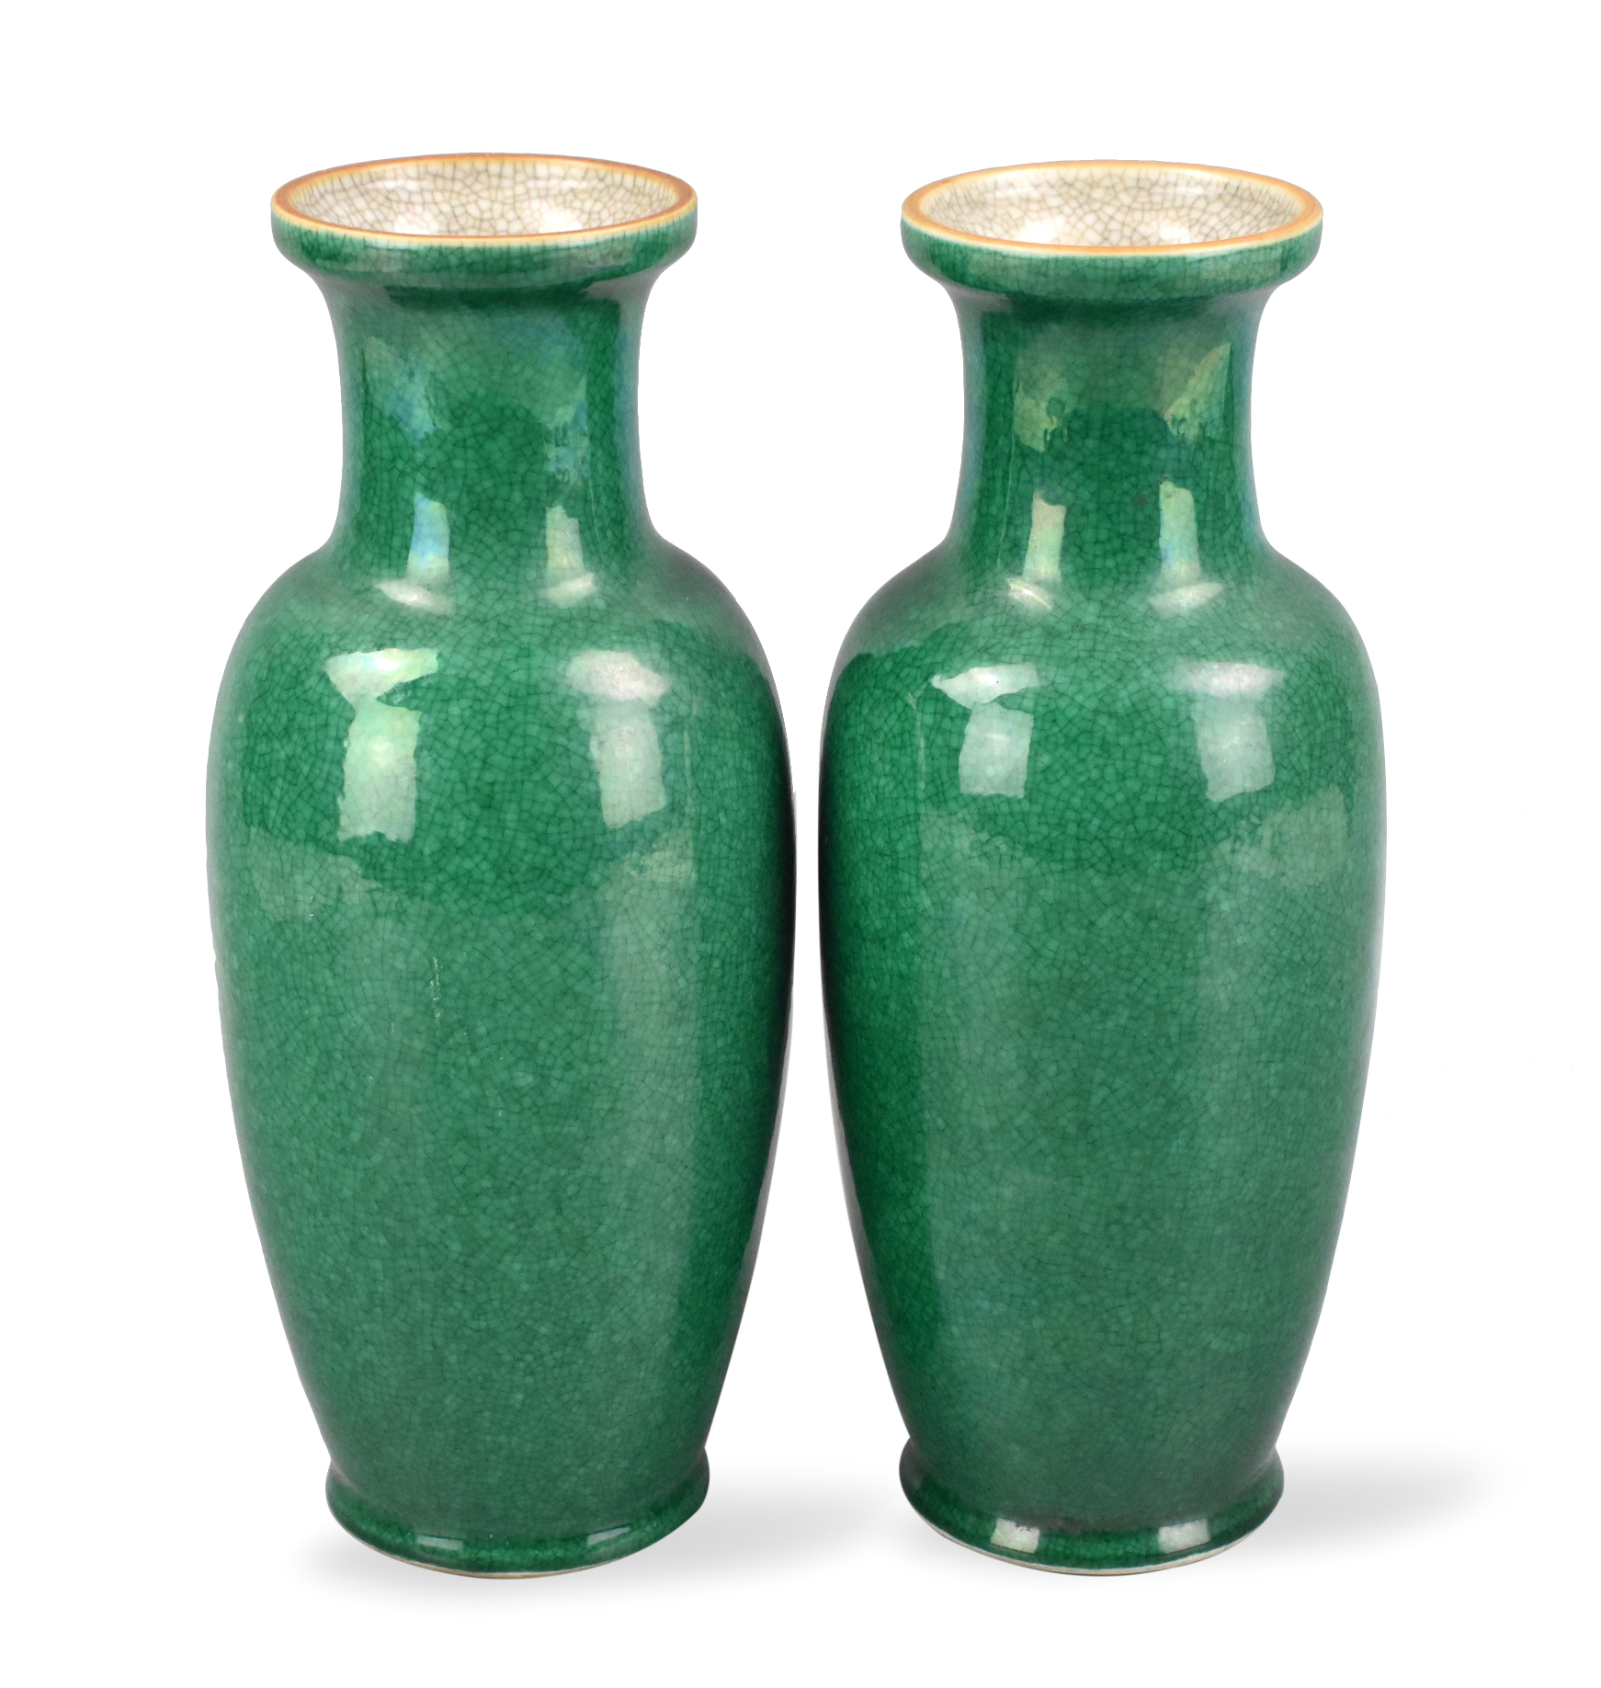 PAIR OF CHINESE GE TYPE GREEN GLAZED 33a01d